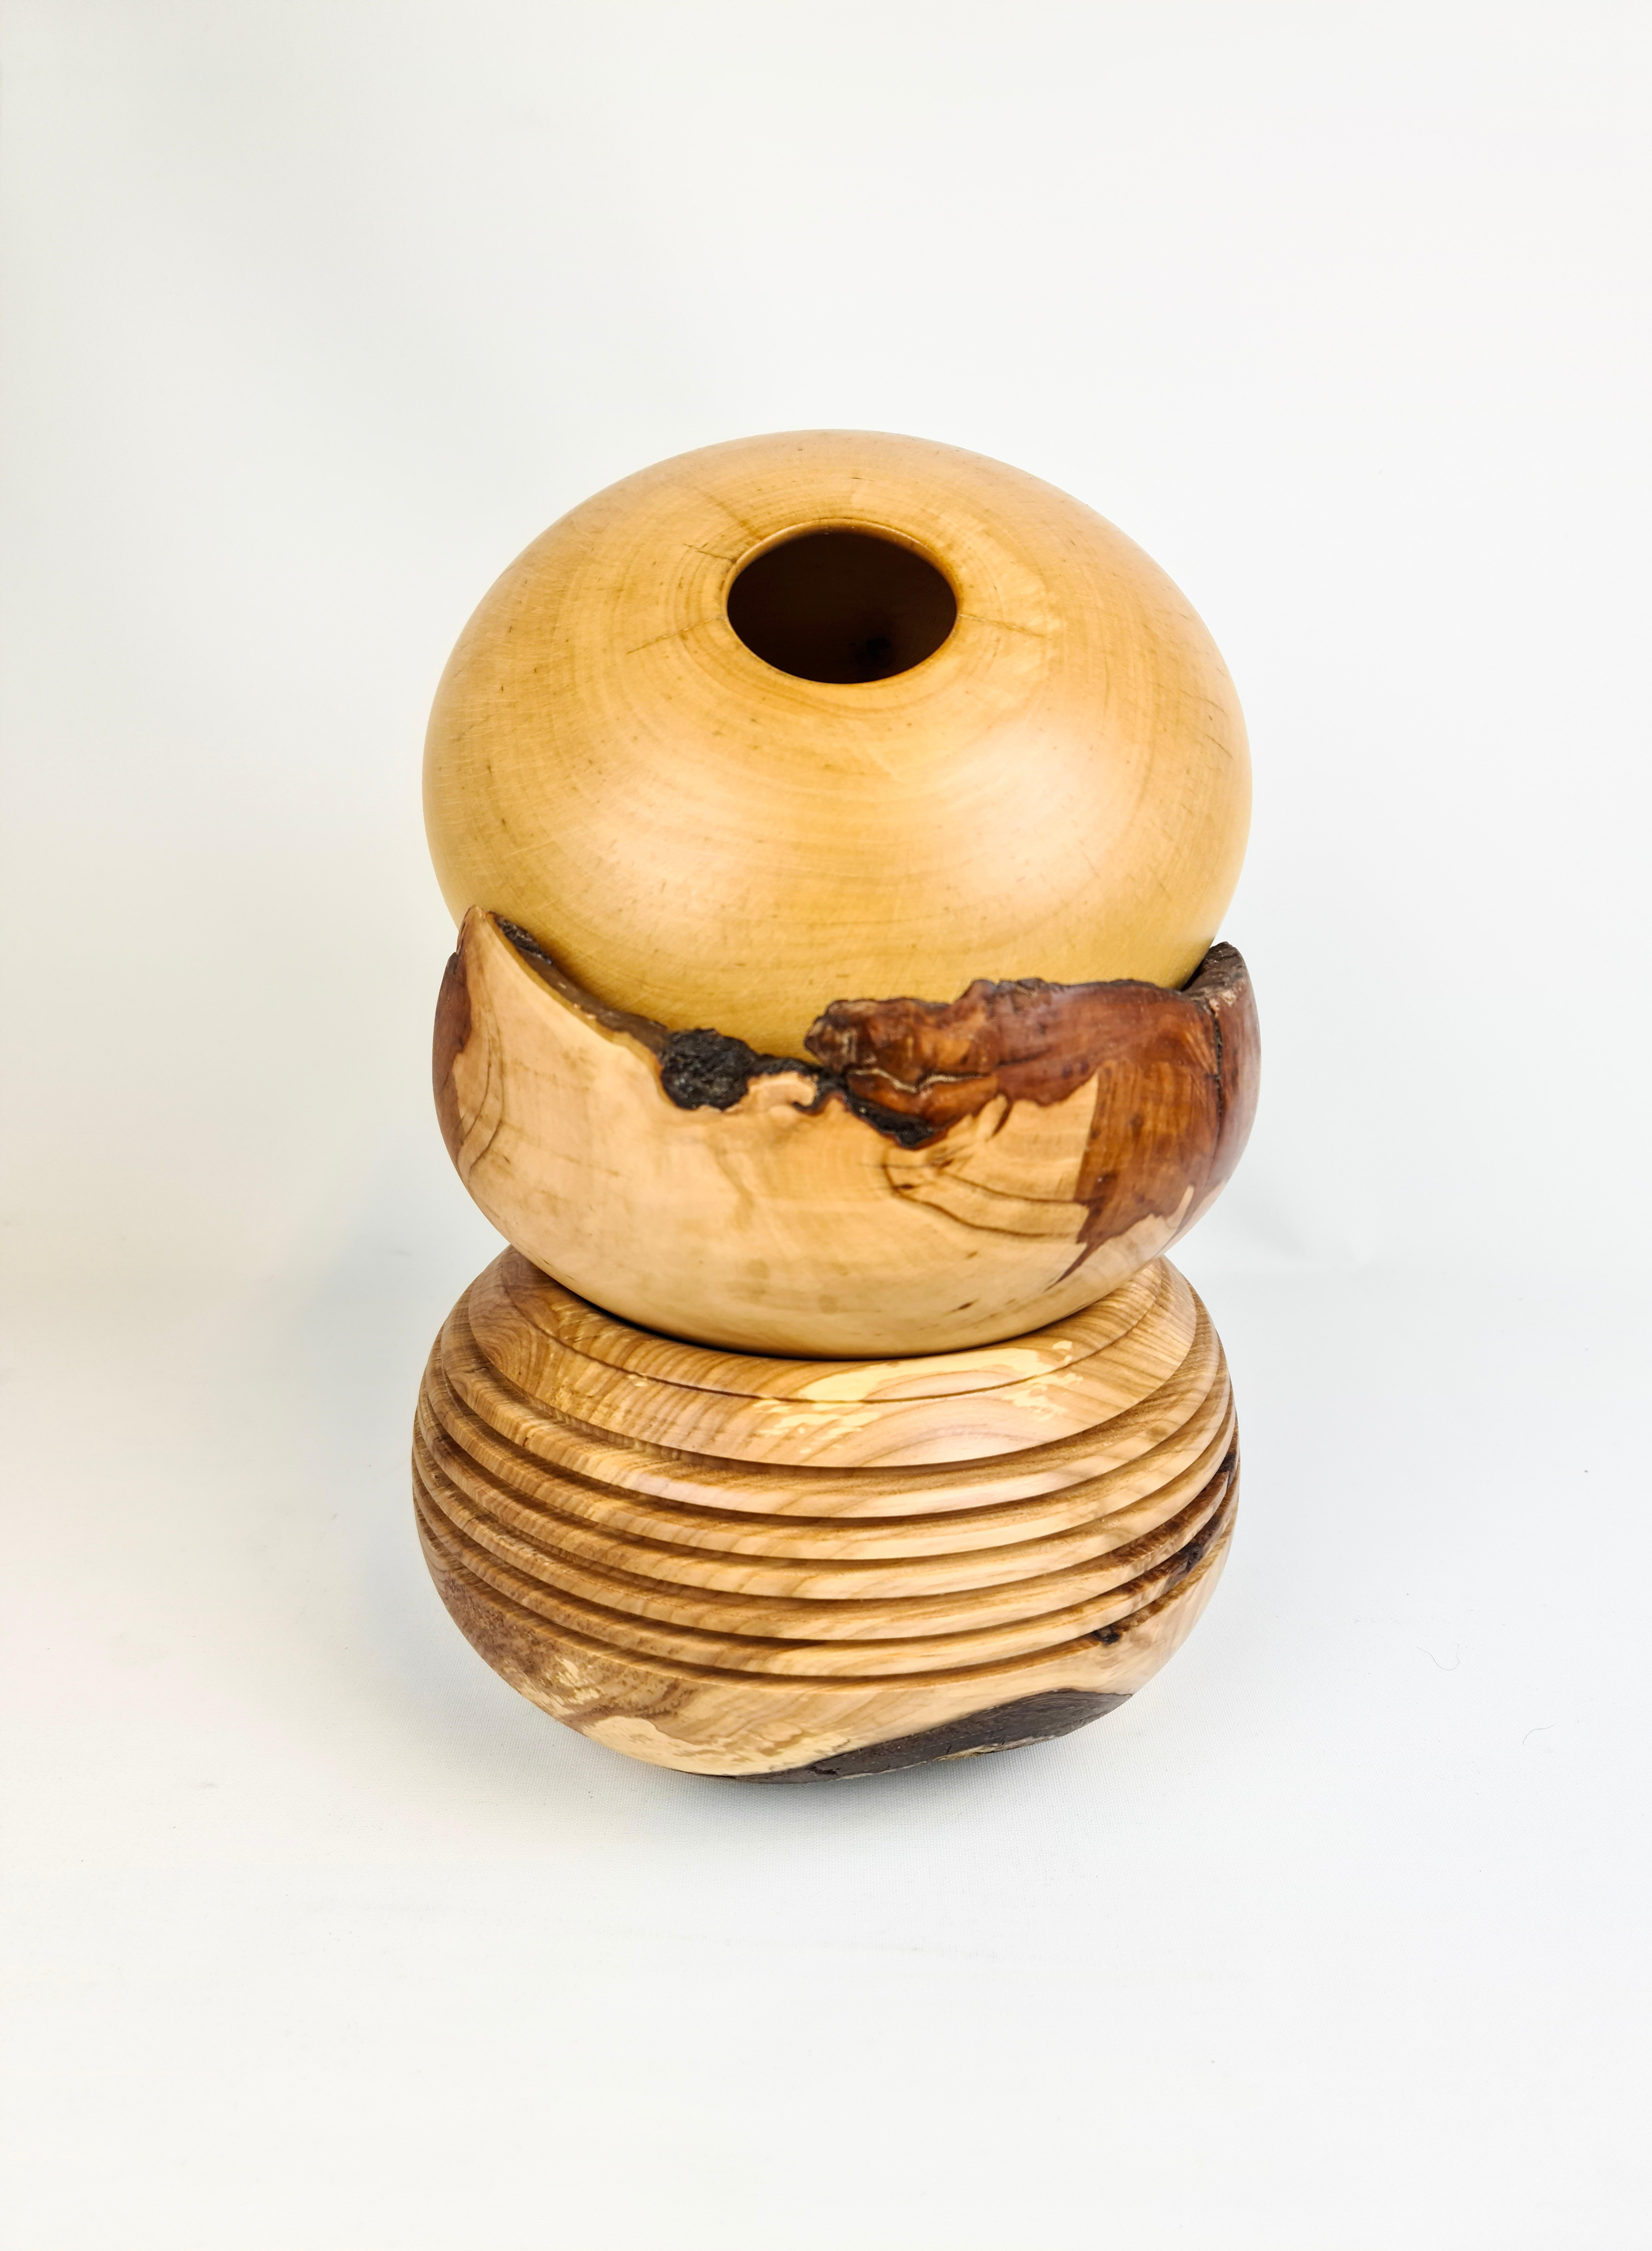 These three bowls made in Sweden with precision handcraft gives a nice edition to any living room with intention to give an organic simple, but jet complex look. The signs of the wood structure and life are clearly visible. 

Good vintage